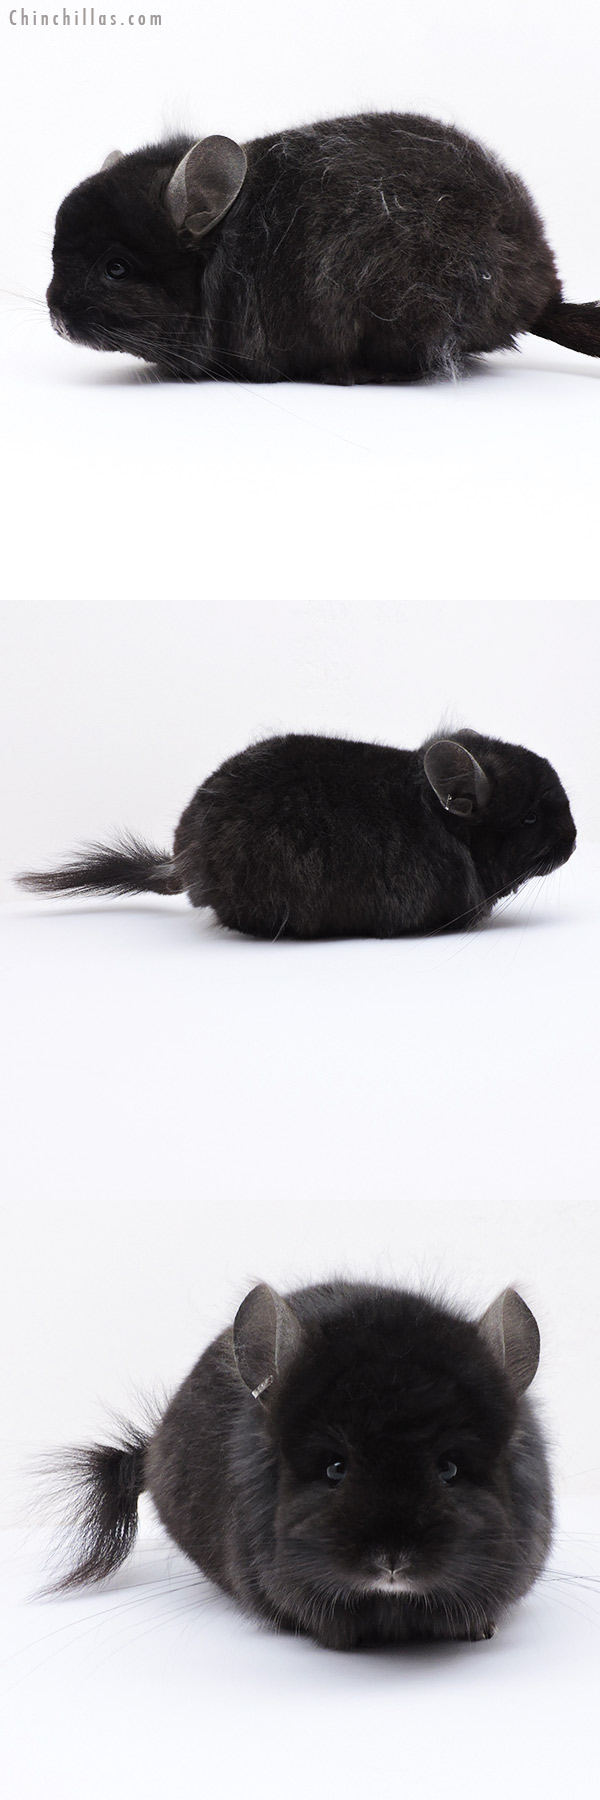 Chinchilla or related item offered for sale or export on Chinchillas.com - 18312 Exceptional Ebony ( Locken Carrier )  Royal Persian Angora Male Chinchilla